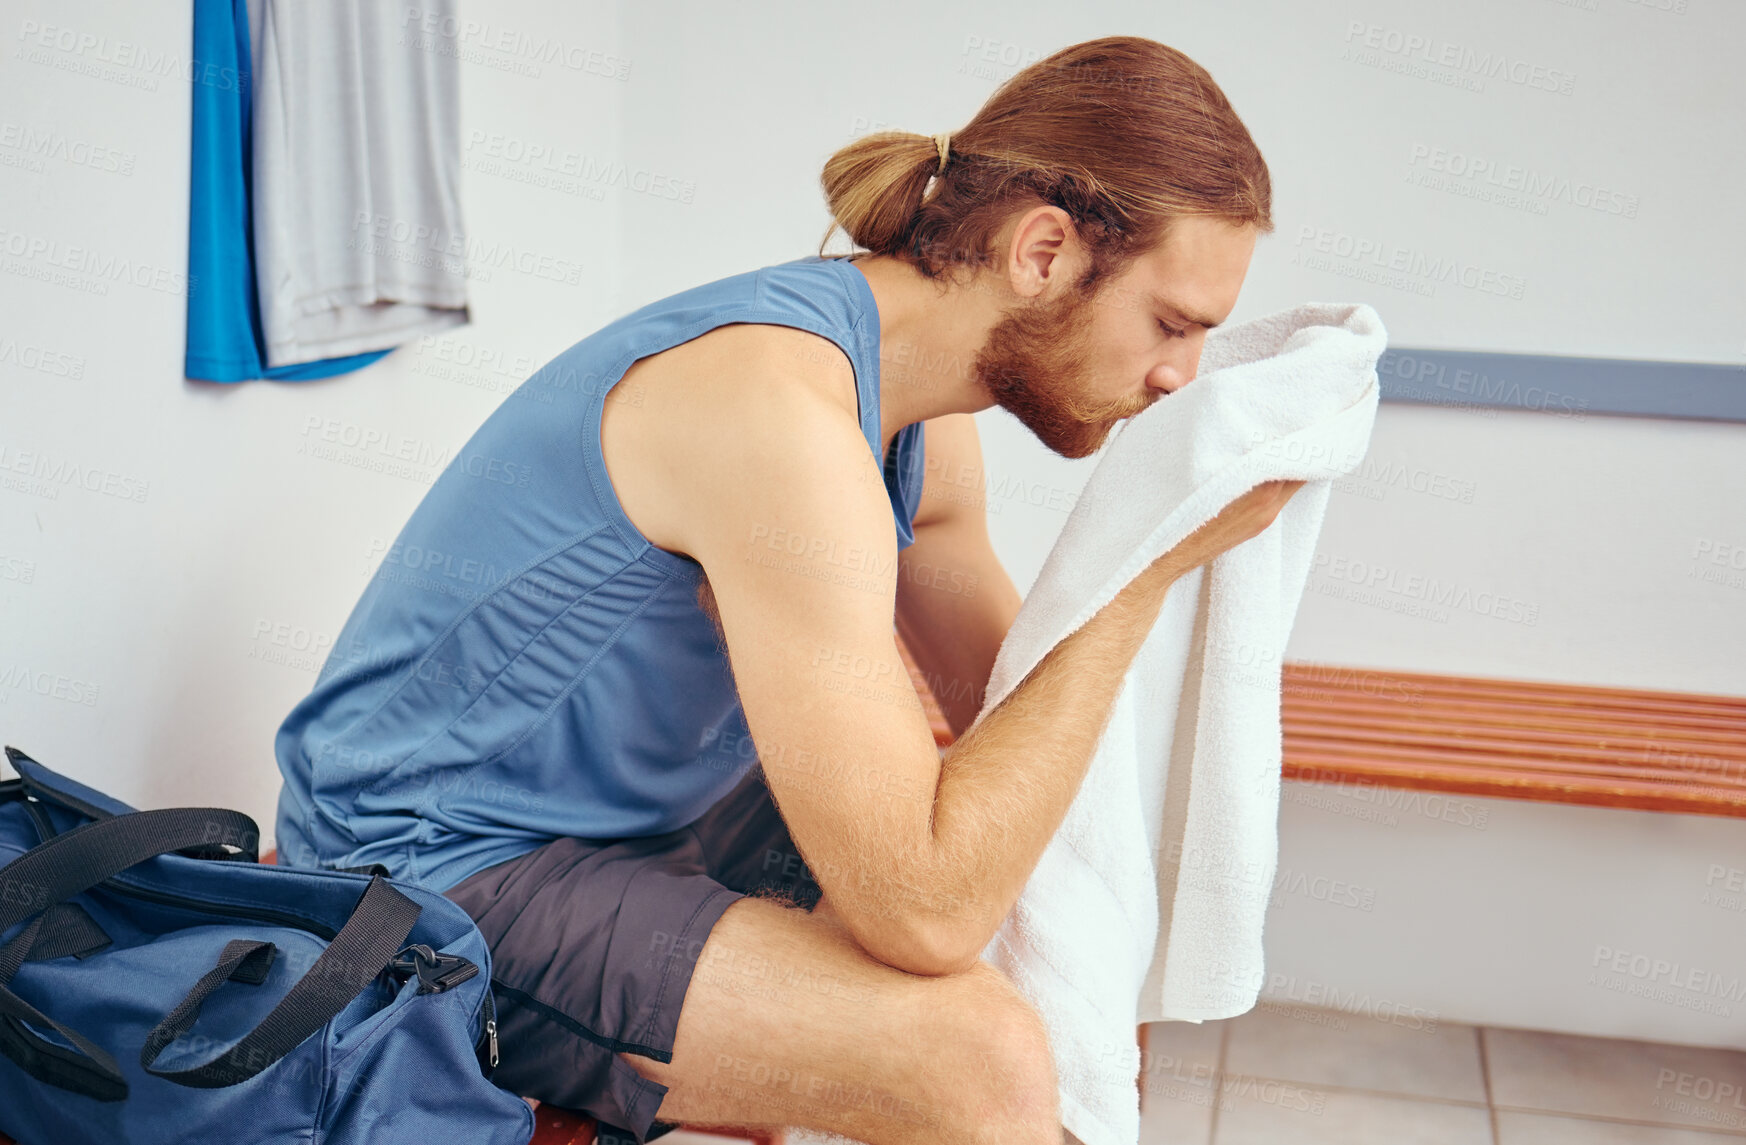 Buy stock photo Caucasian player wiping his face with a towel. Tired young player wiping his face after a squash match. Professional athlete taking a break from his squash match to rest in a gym locker room